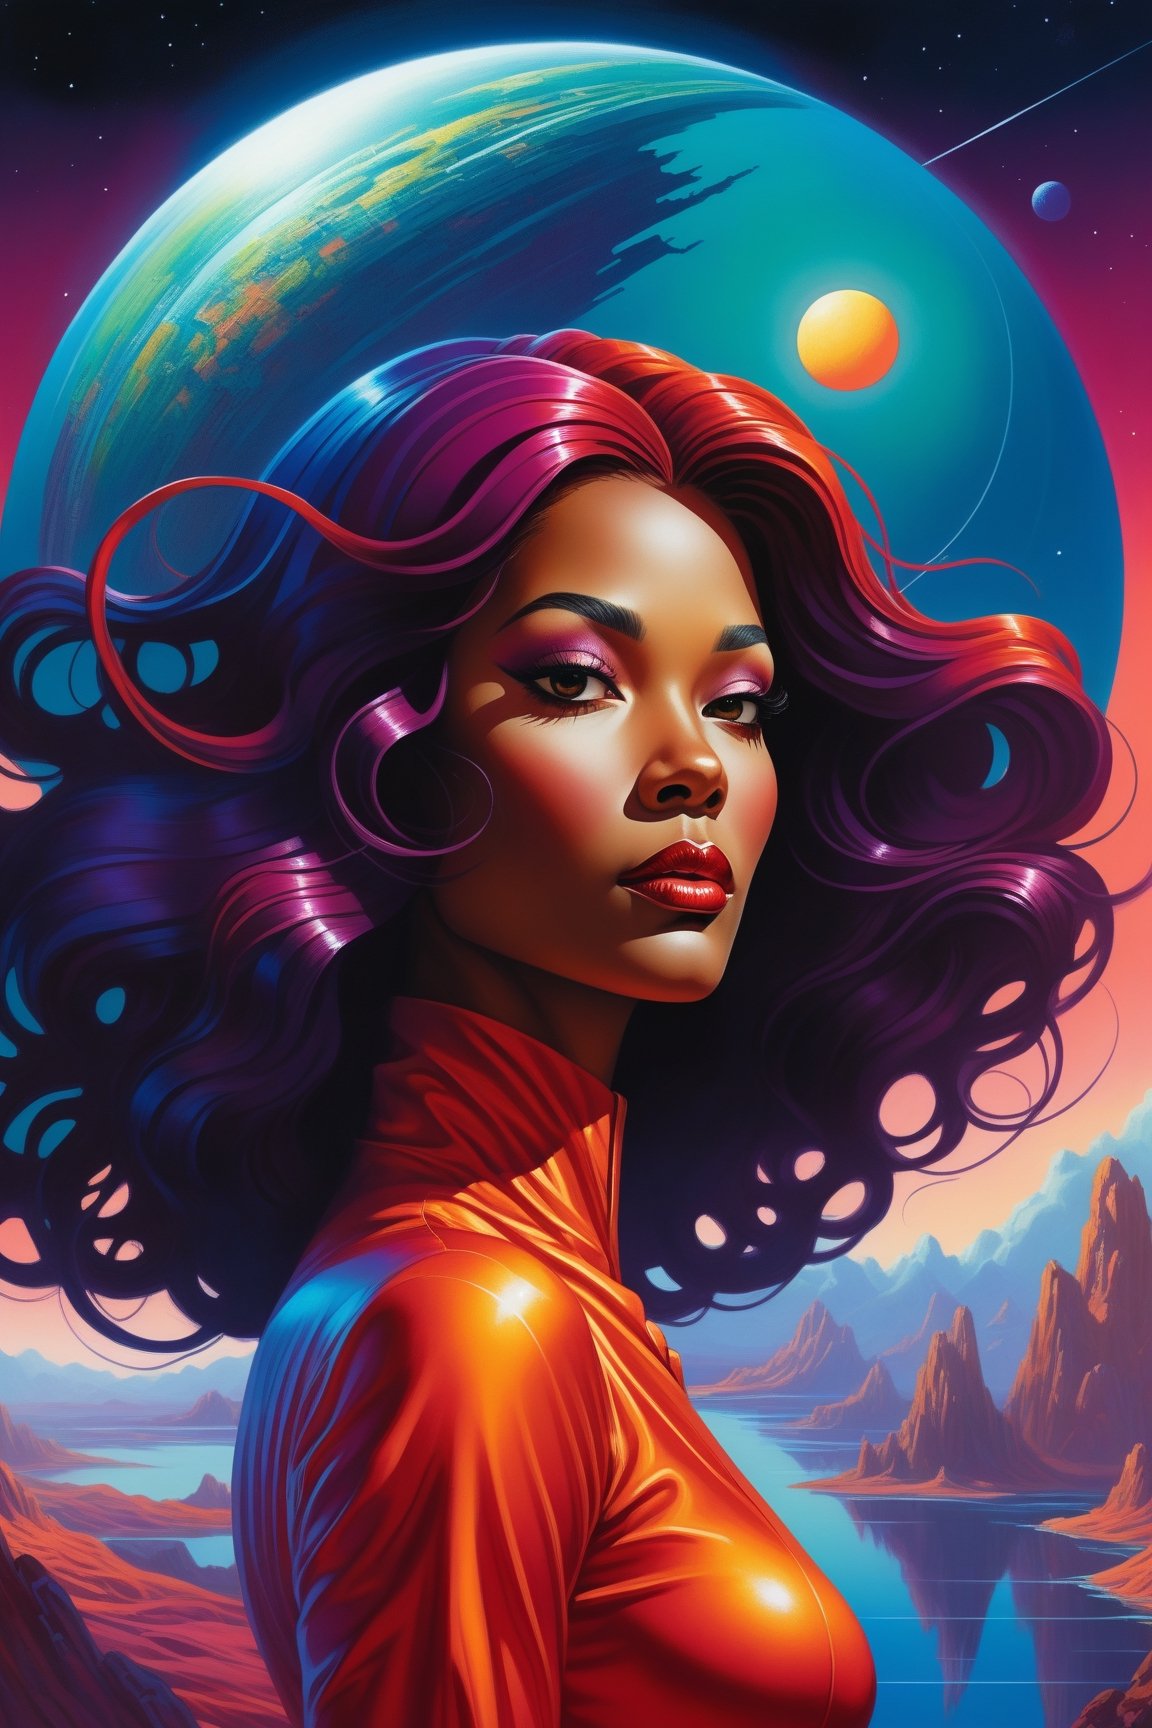 Retro-futuristic poster inspired by Kelly Freas and Kilian Eng's styles, A close up of a woman with (lush, vibrant hair:0.7) on an otherworldly landscape, her face illuminated by (bold color contrasts:1.4), creating a sense of (mystery and allure:1.3).